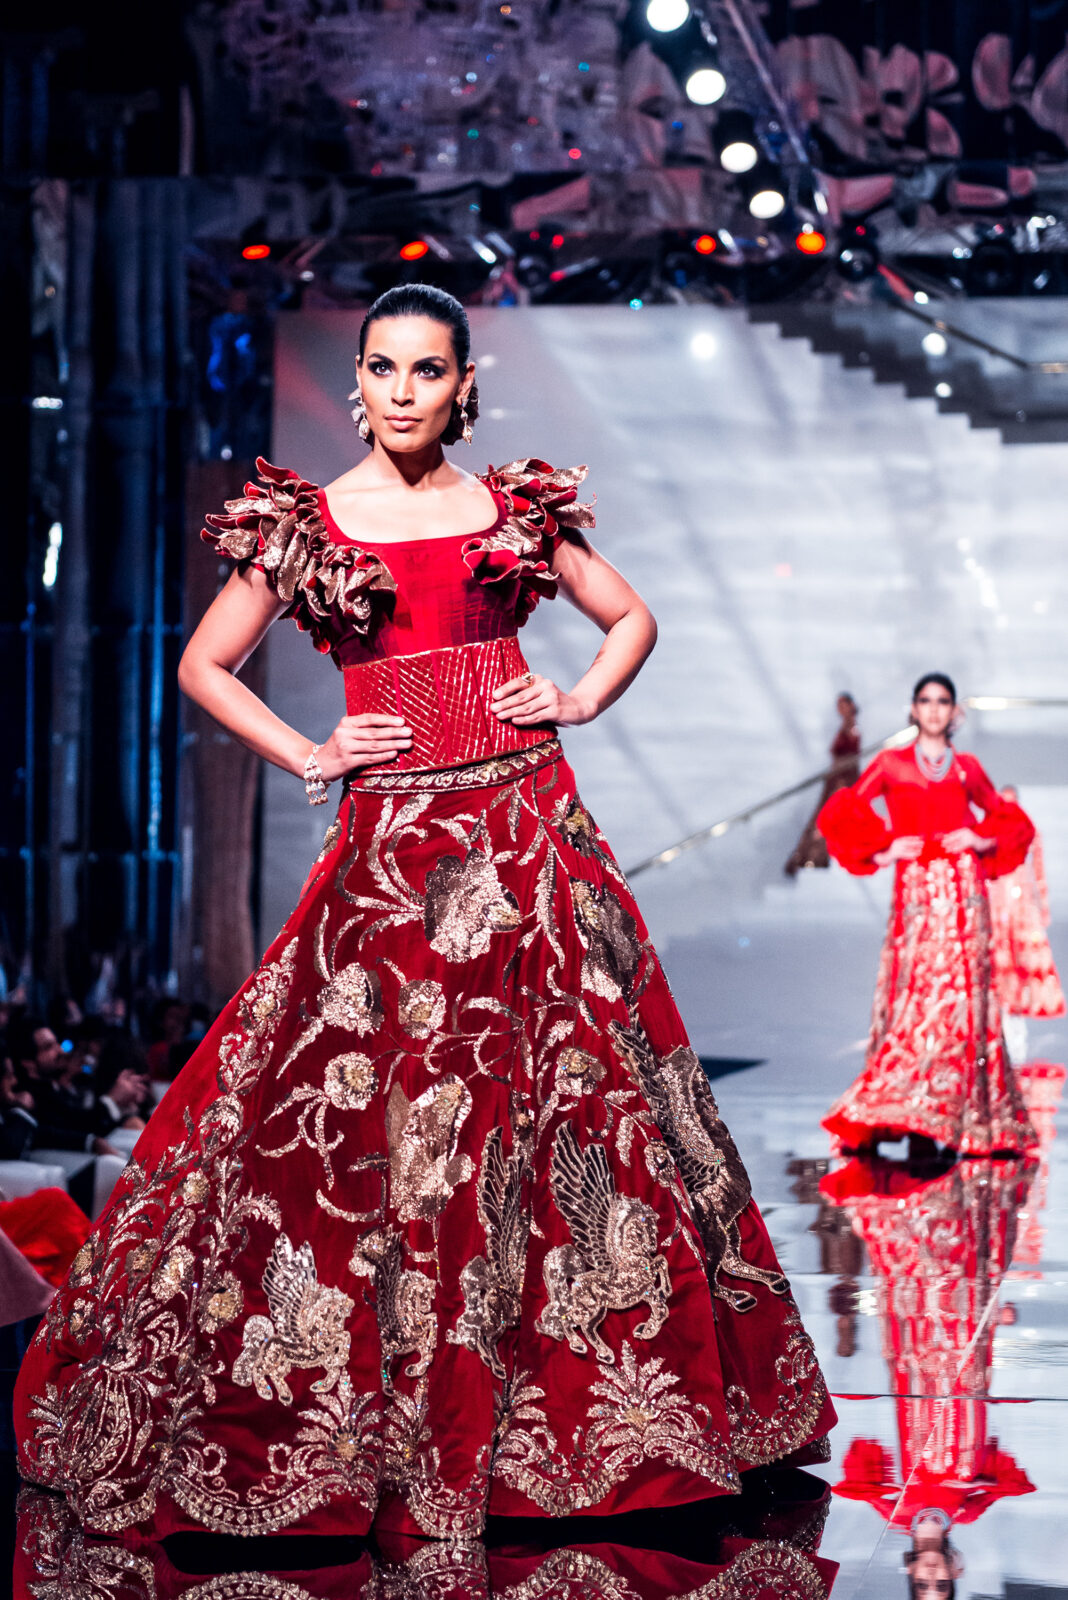 Couture Elegance: Artistry and Craftsmanship in Fashion